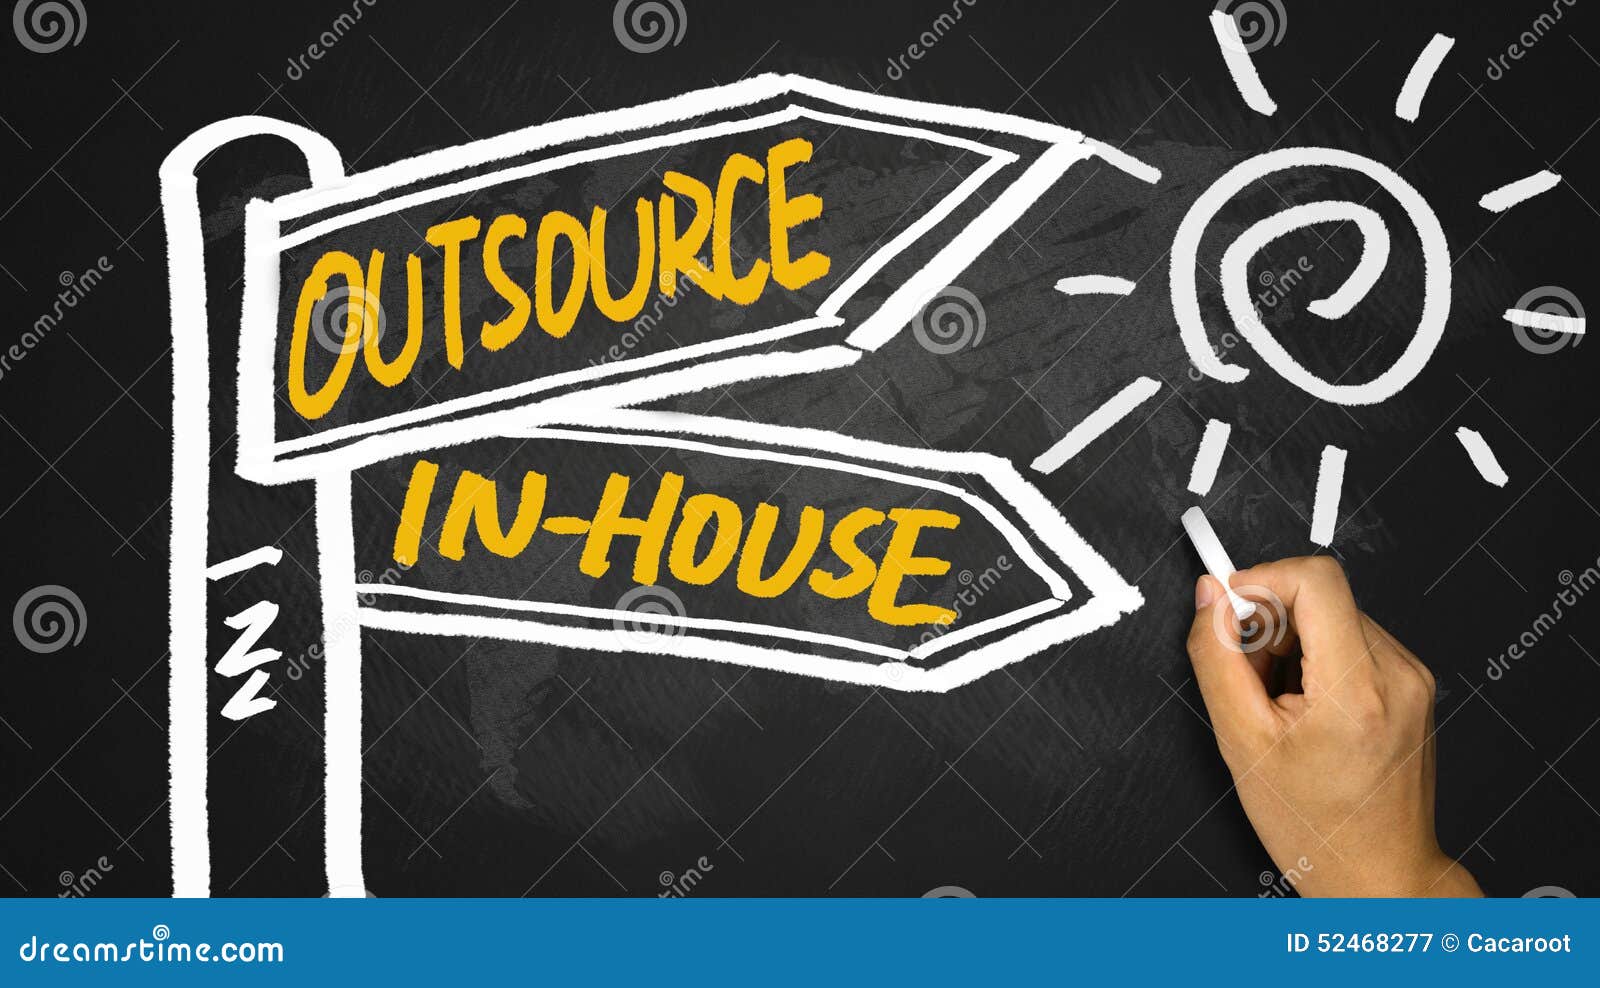 outsource or in-house signpost hand drawing on blackboard